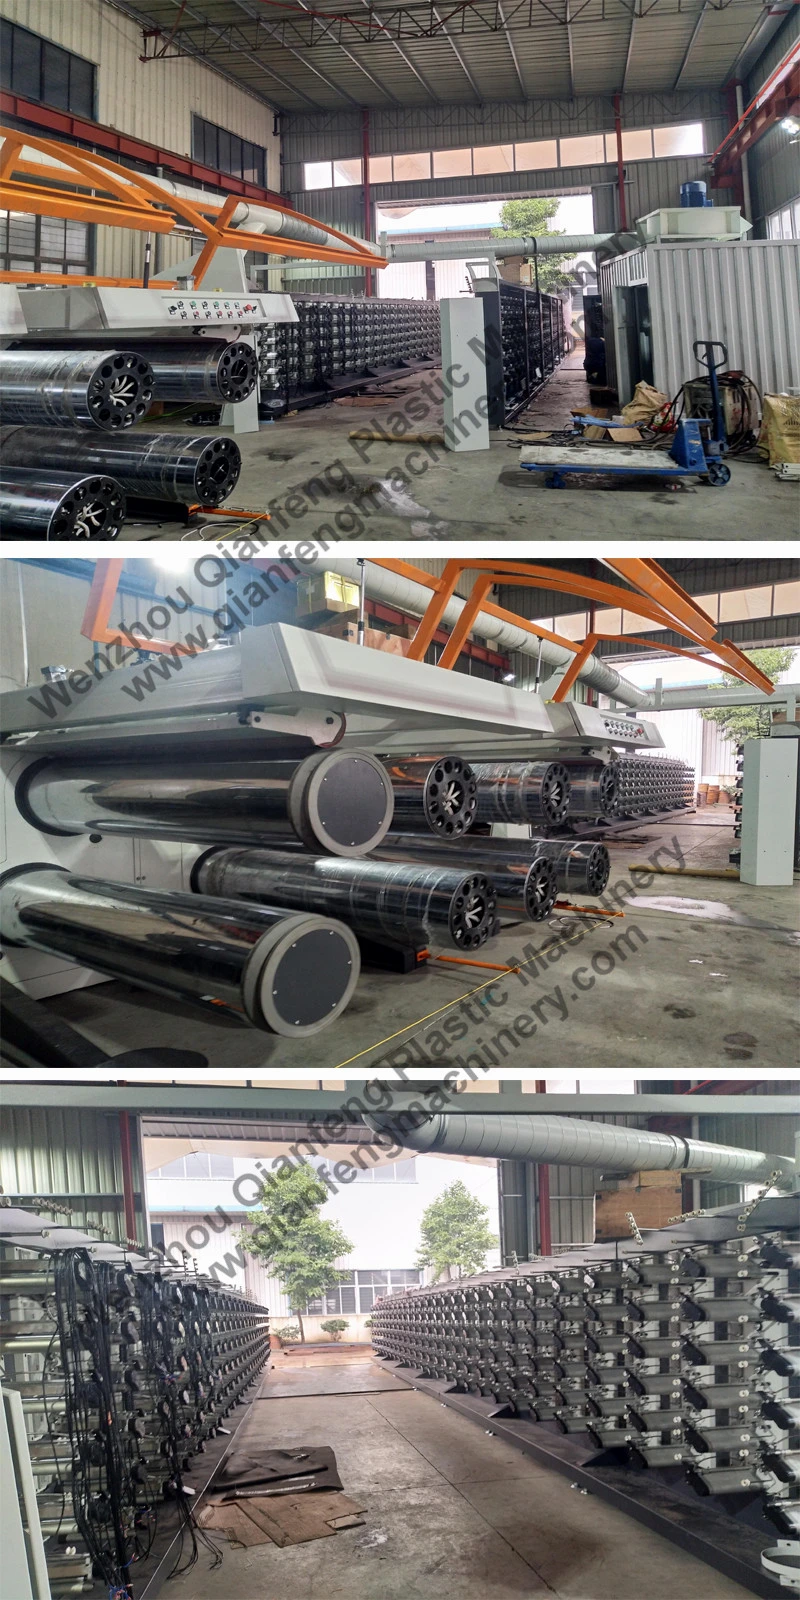 High Speed Computerized Plastic PE, PP Tape Flat Yarn Extruding Drawing Machine for Woven Bag